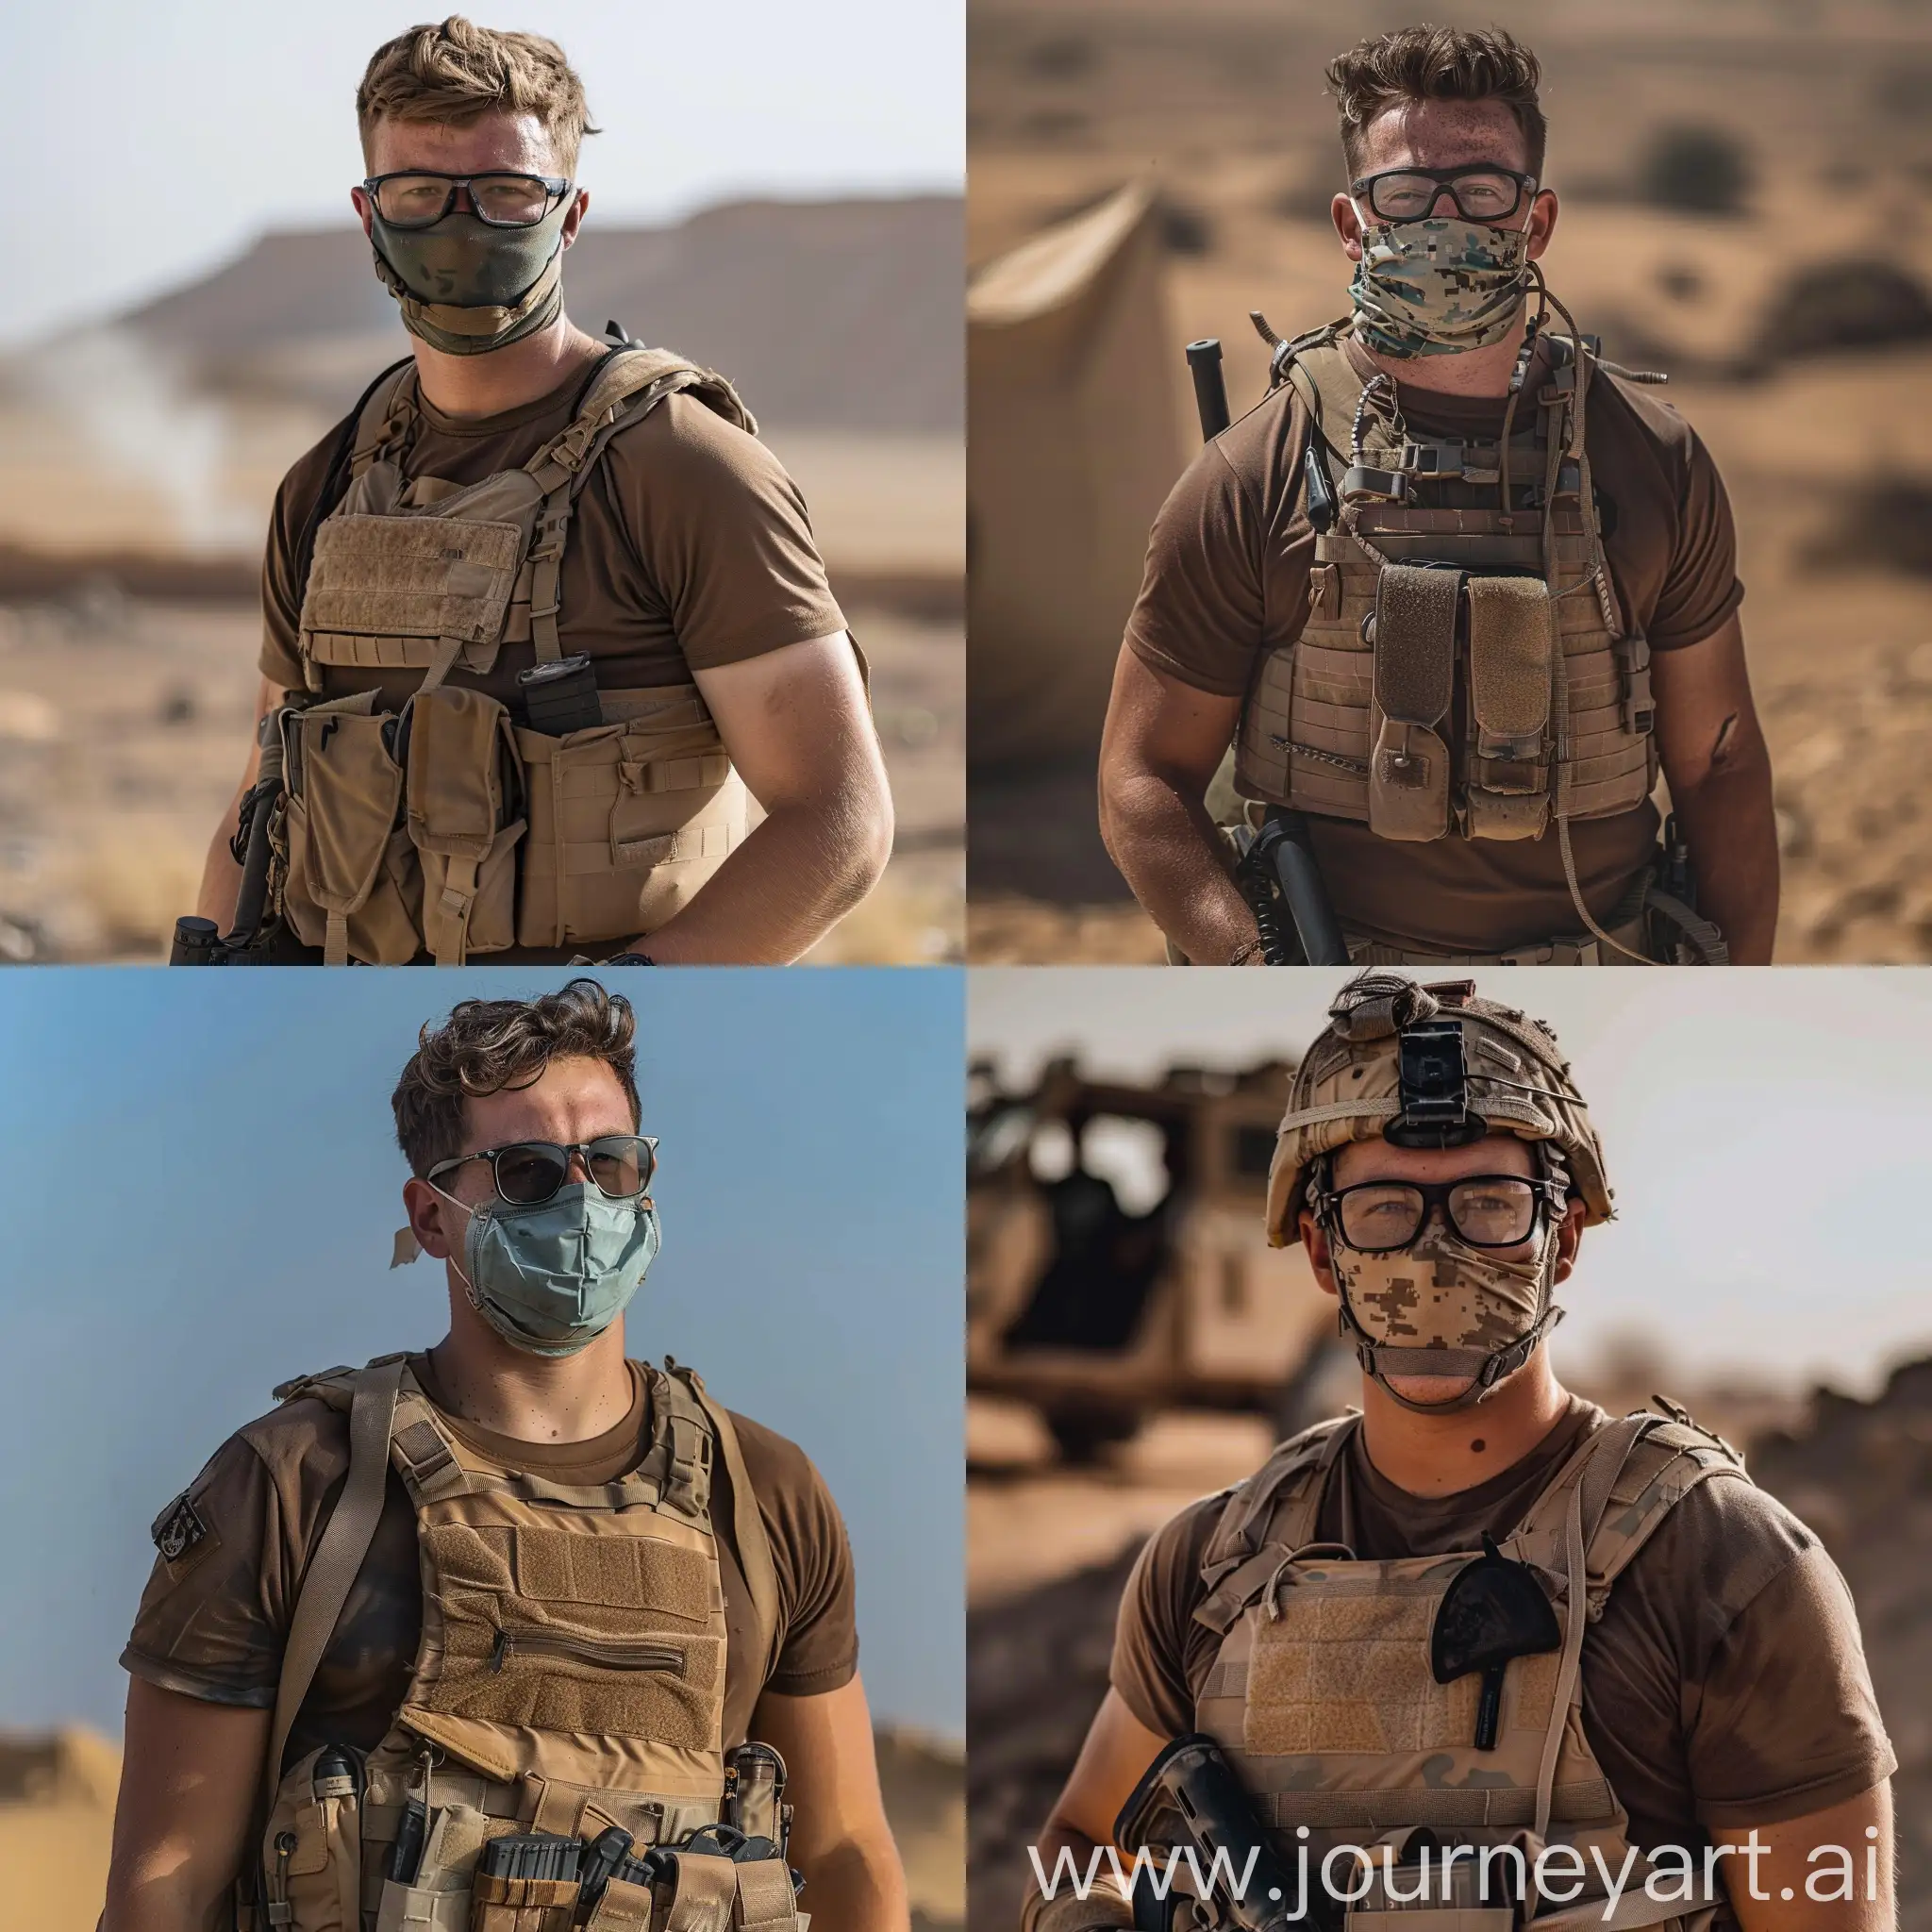 DesertClad-British-Soldier-with-Tactical-Gear-and-Protective-Mask